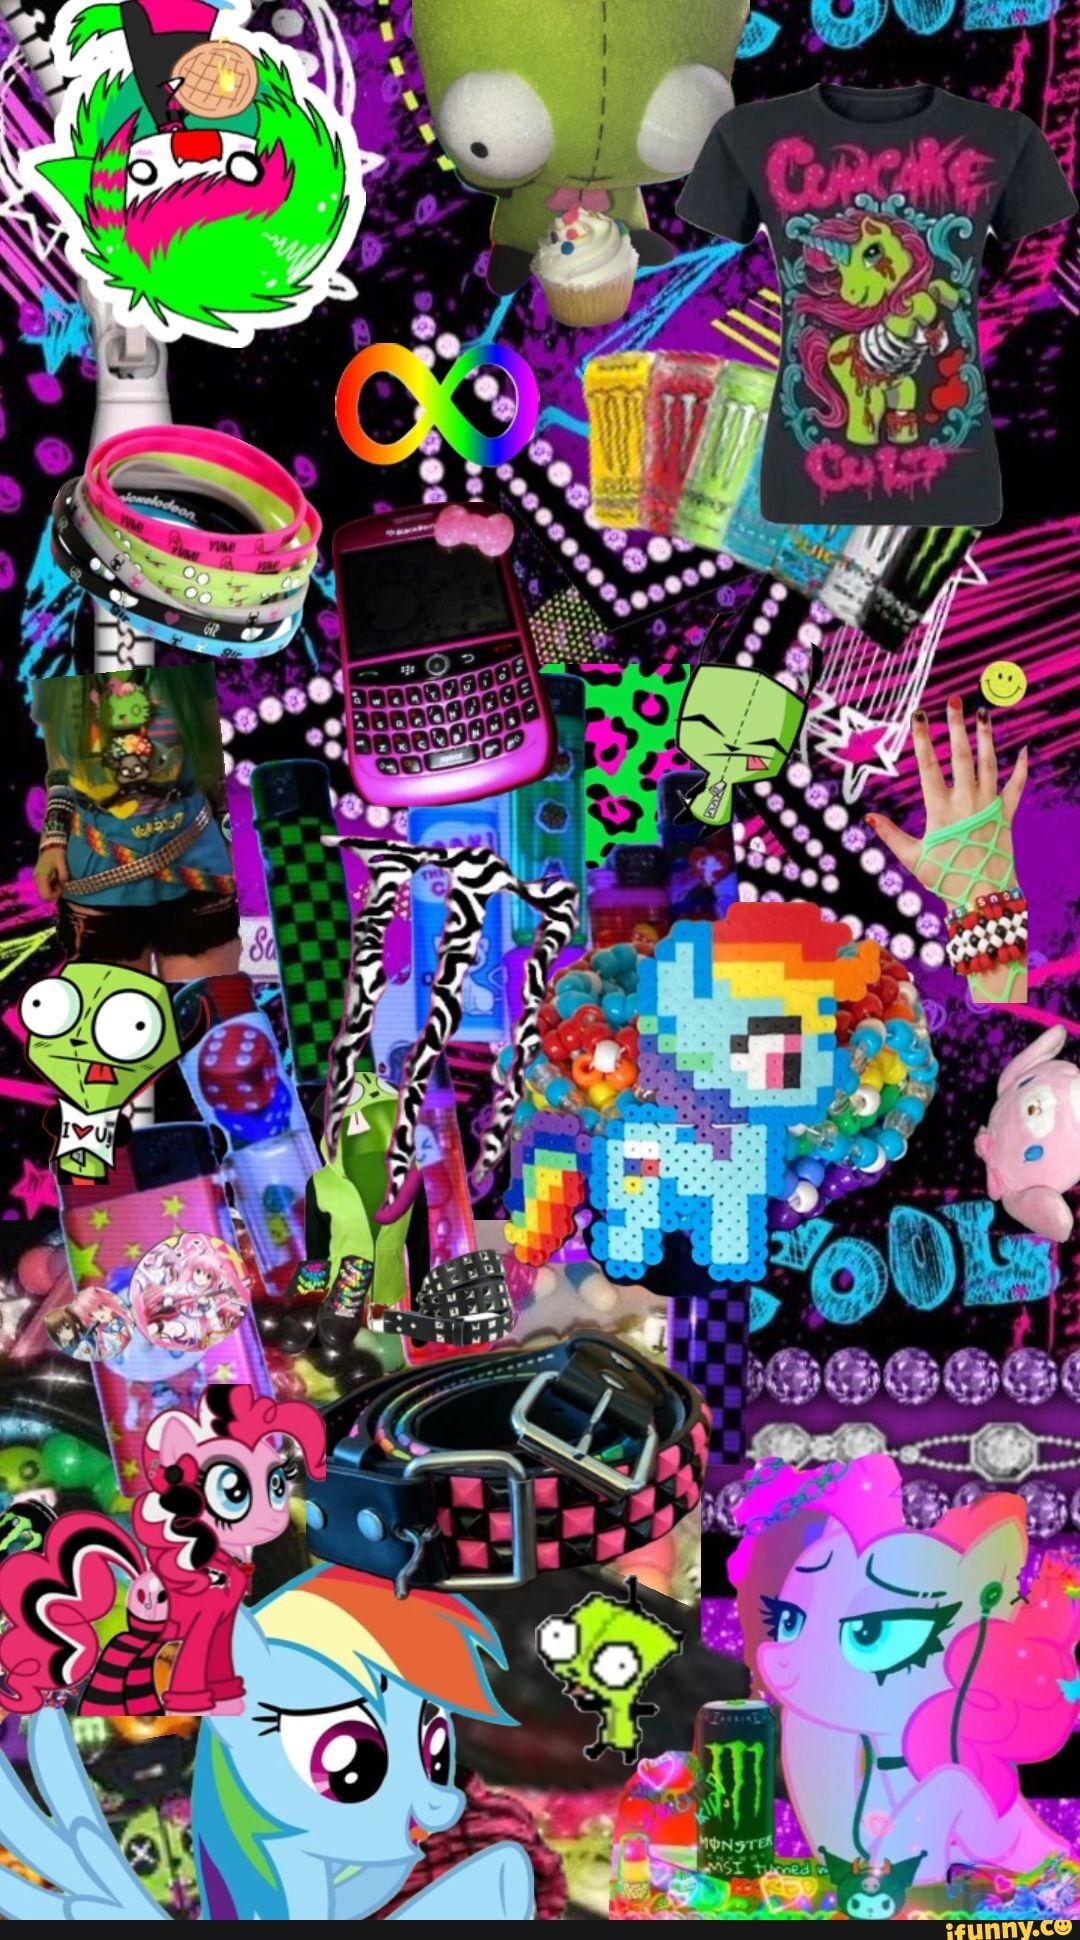 A collage of various pop culture items including My Little Pony, Adventure Time, and Teen Titans. - Scenecore